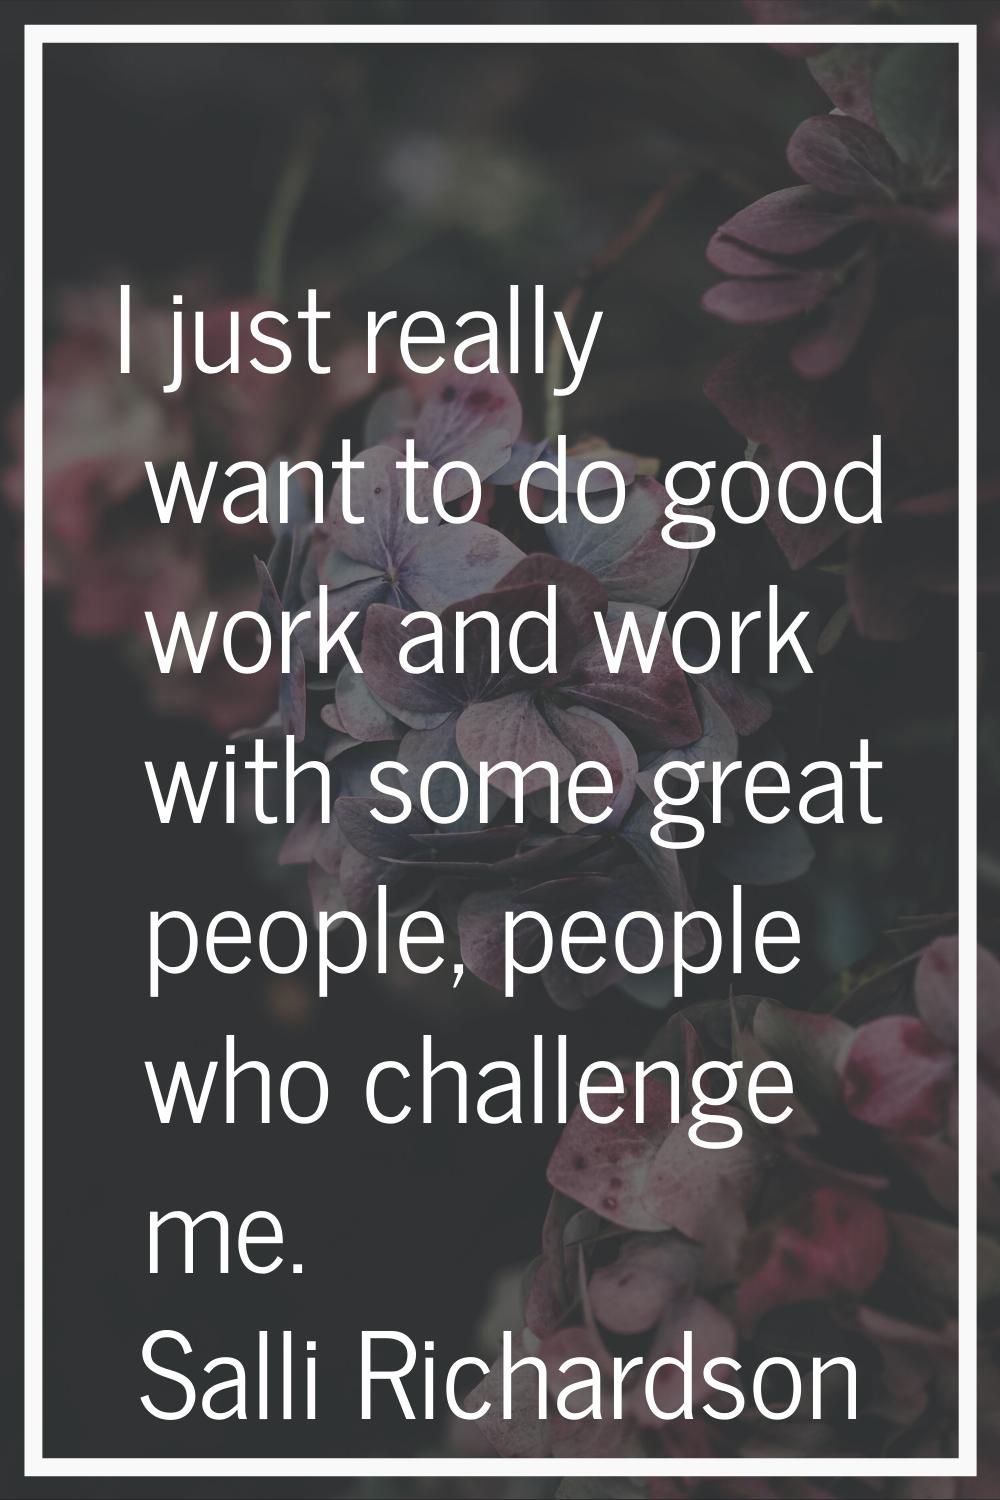 I just really want to do good work and work with some great people, people who challenge me.